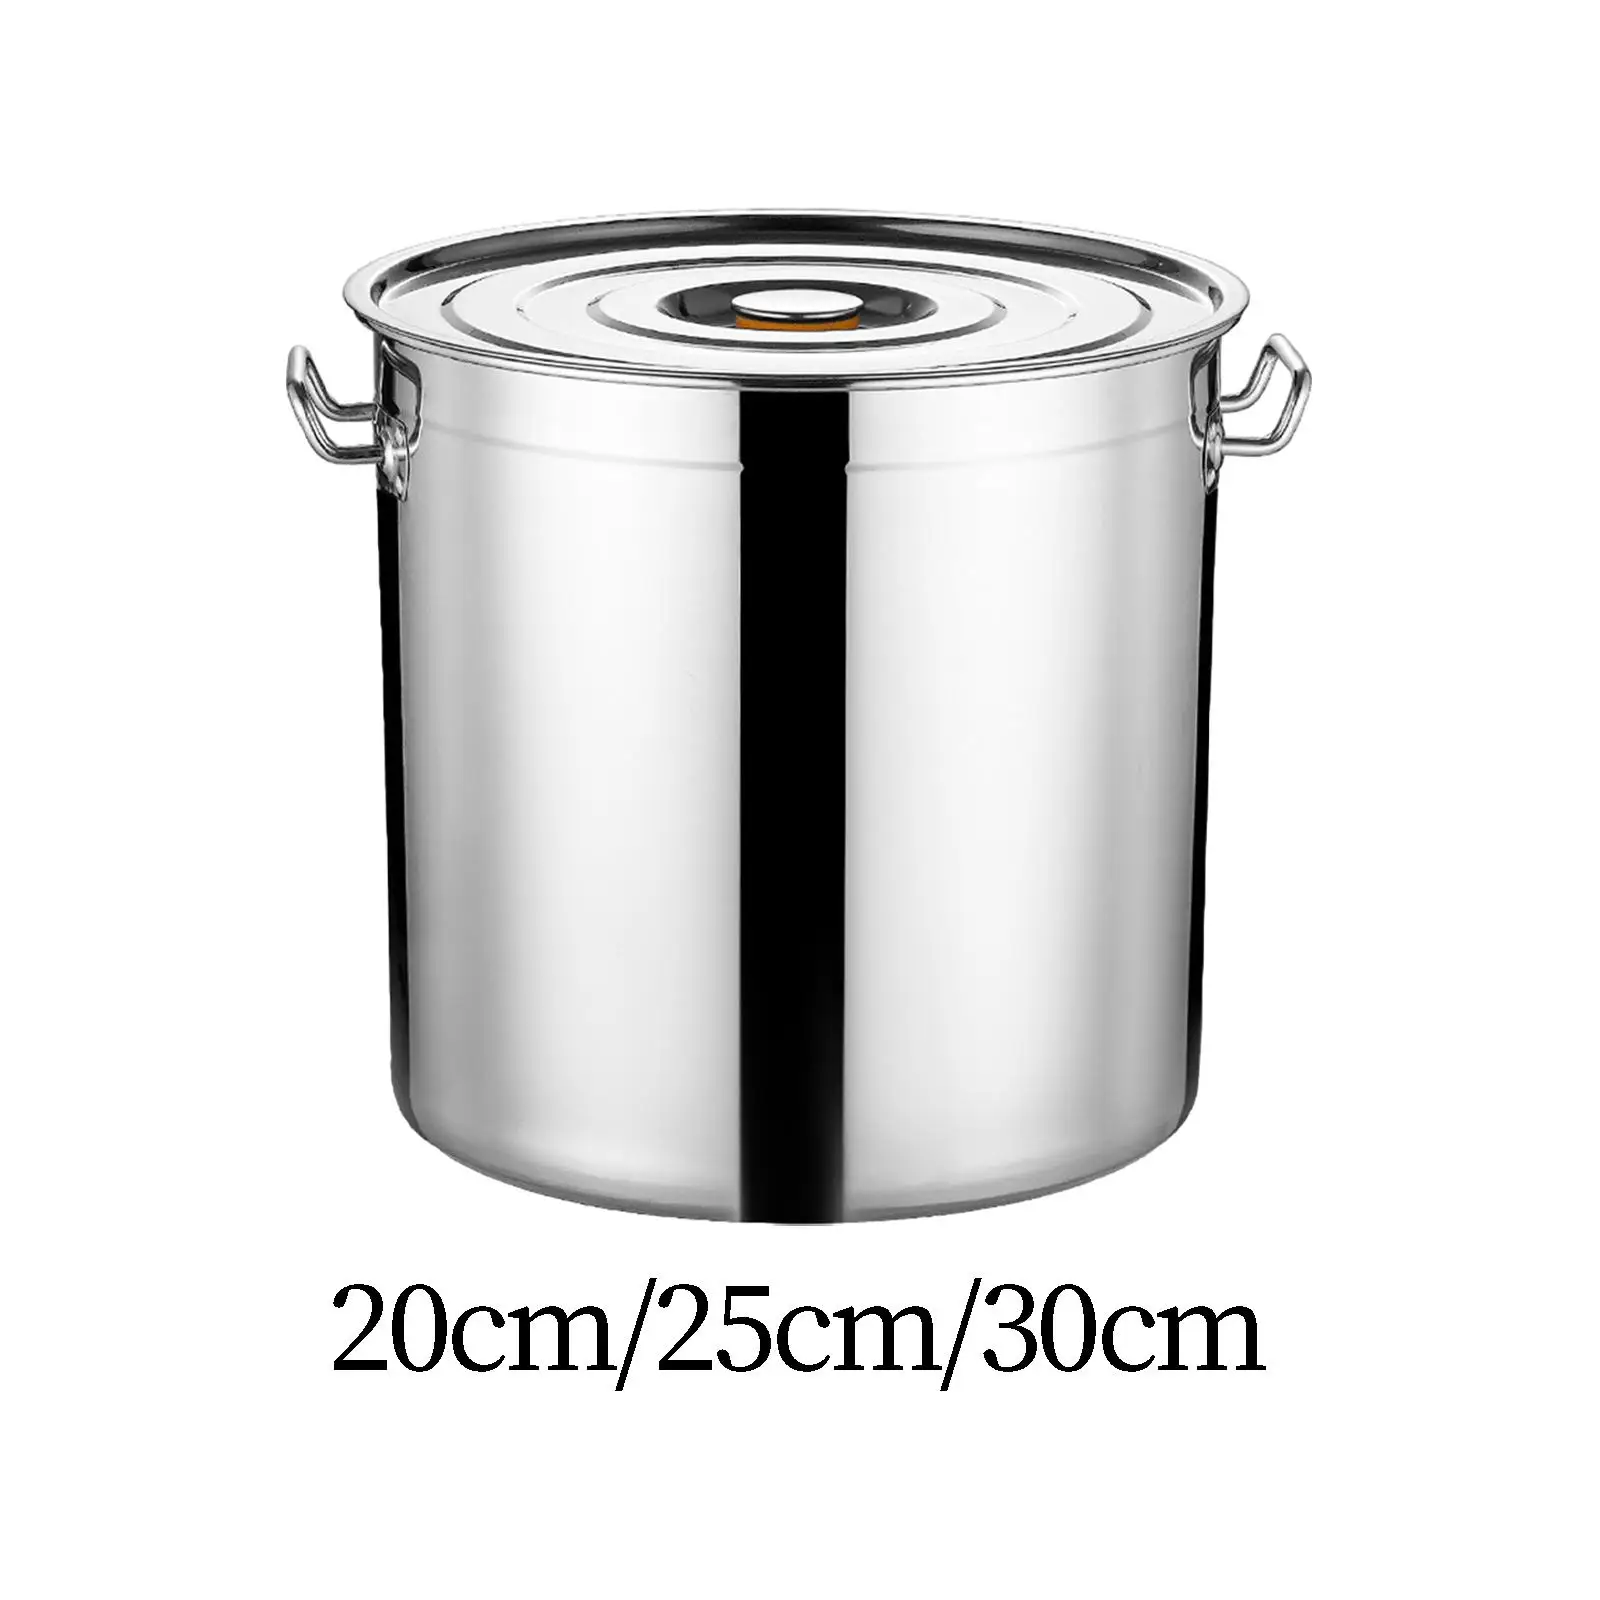 Stainless Steel Cookware Stockpot Tall Cooking Pot Professional Cookware Large Soup Pot for Hotel Commercial Canteens Household